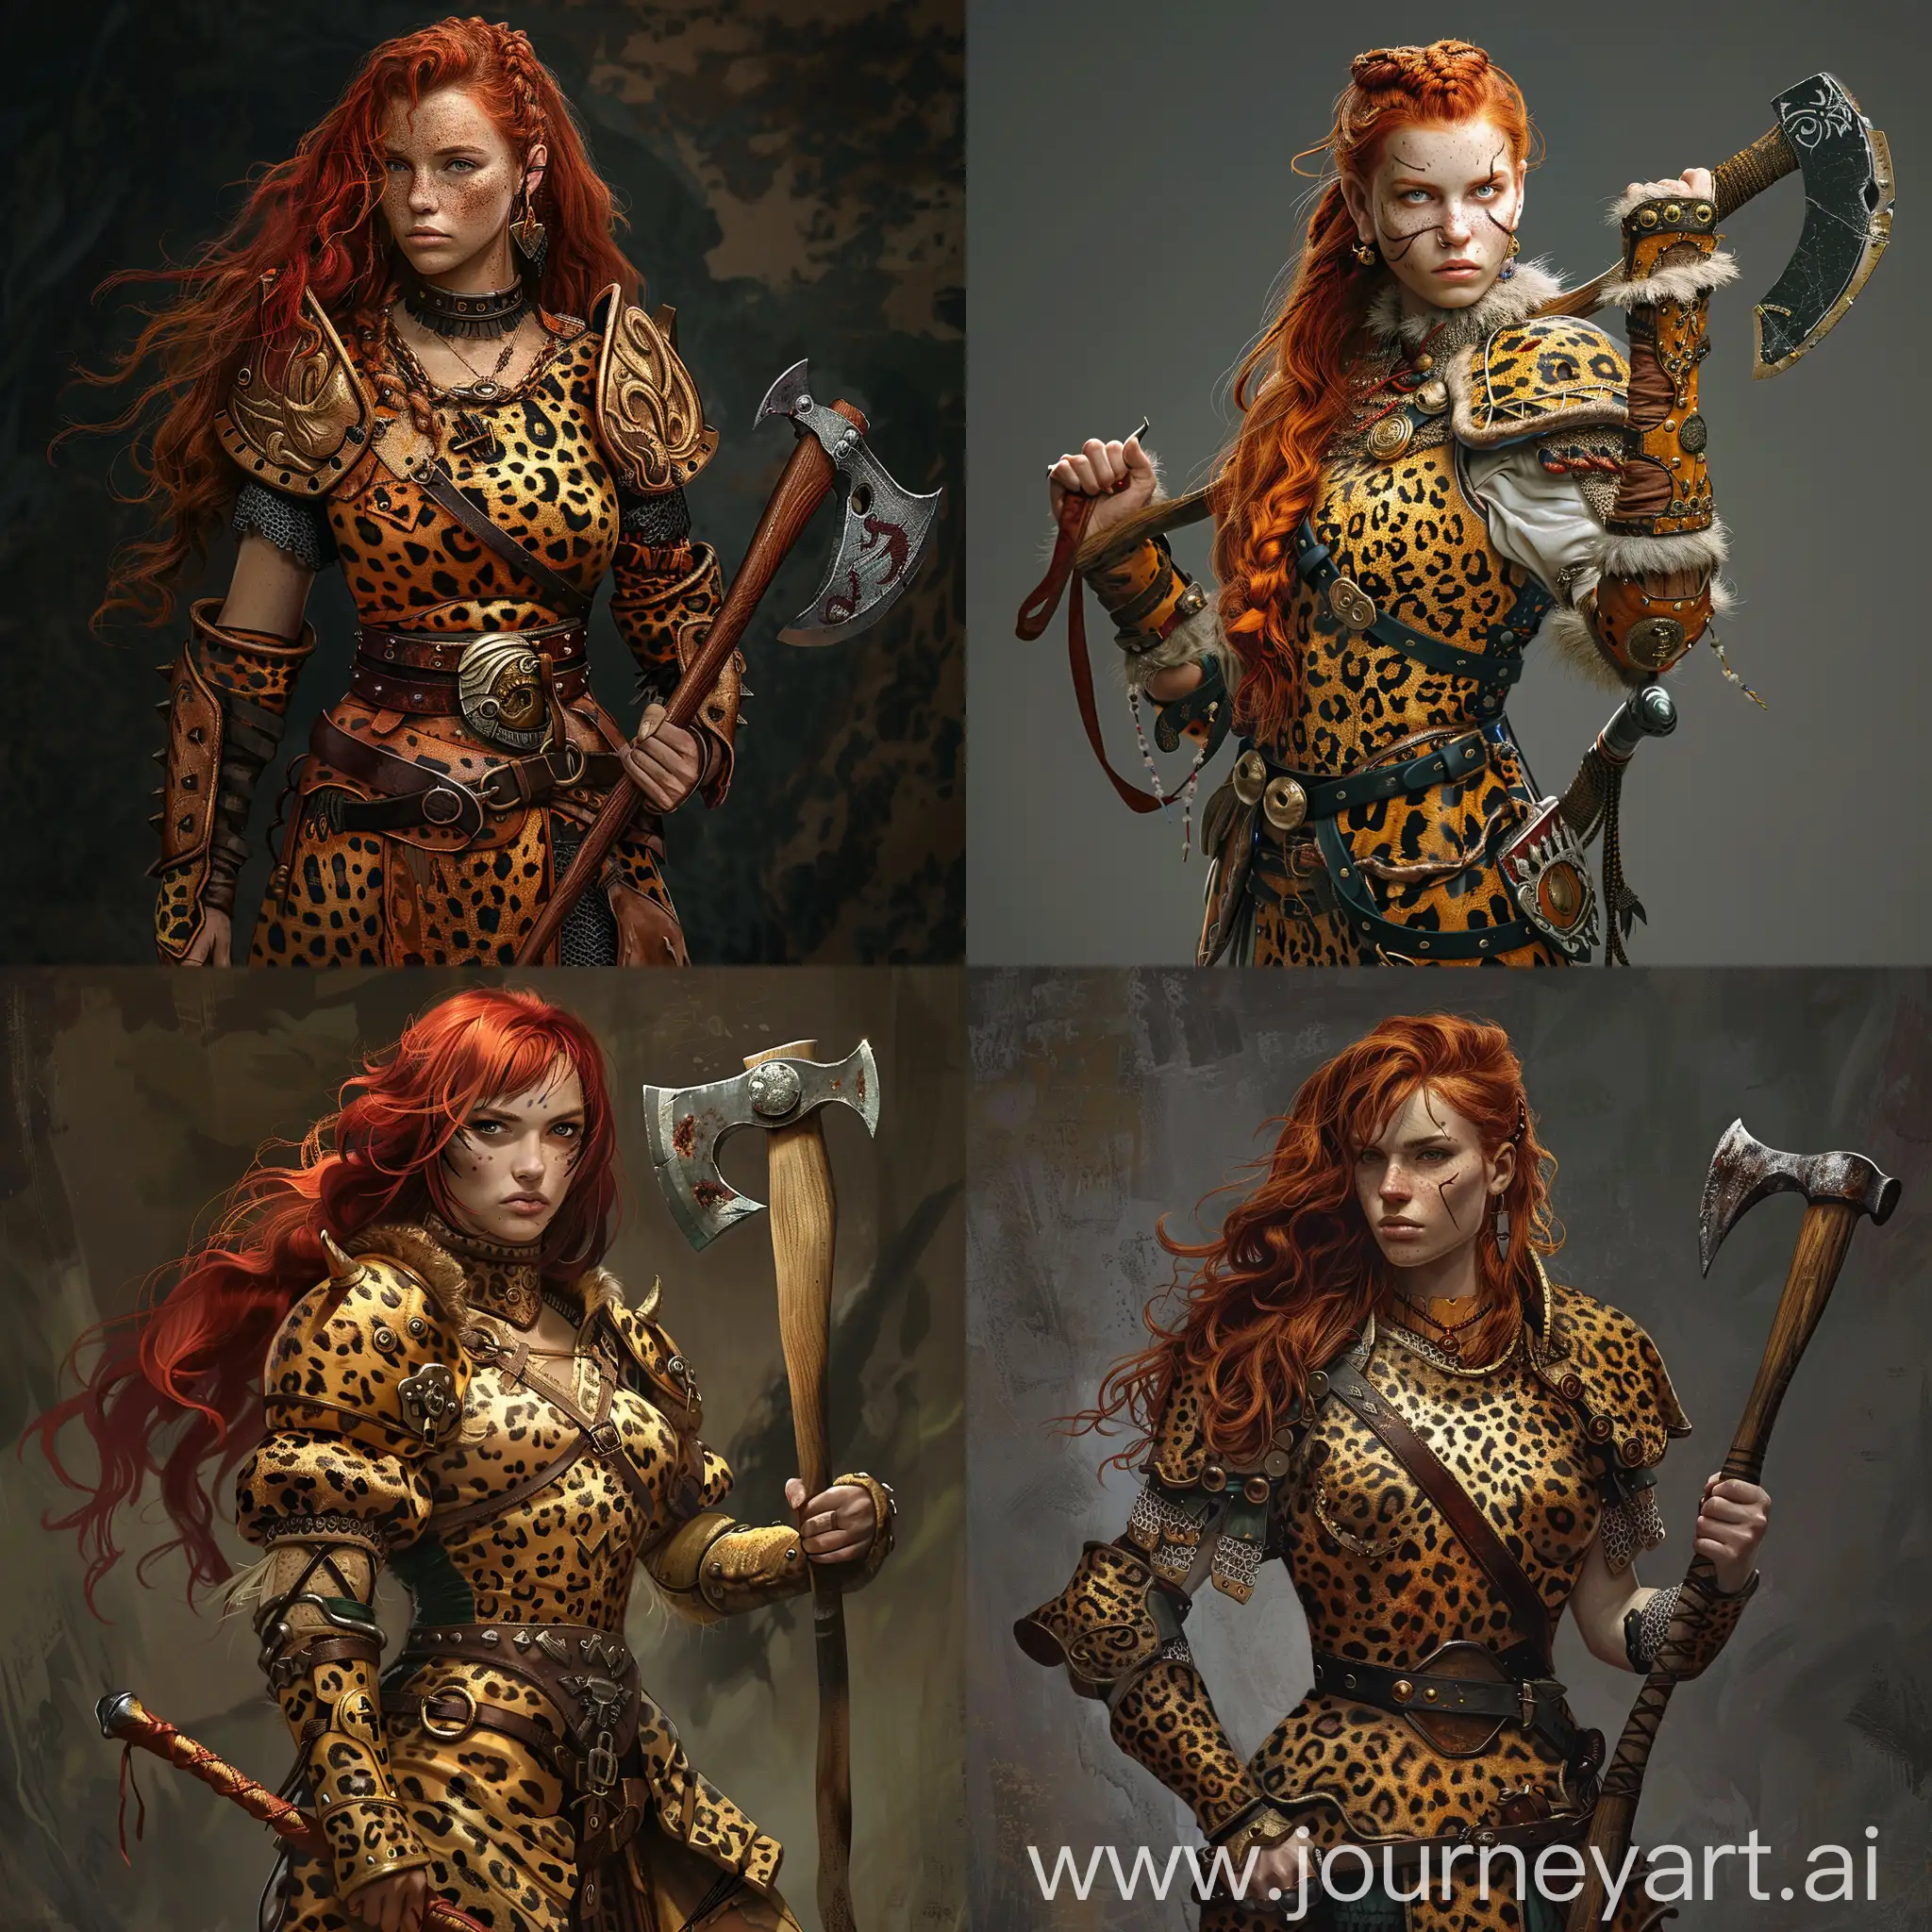 RedHaired-Woman-Warrior-in-Sturdy-Leopard-Armor-with-Axe